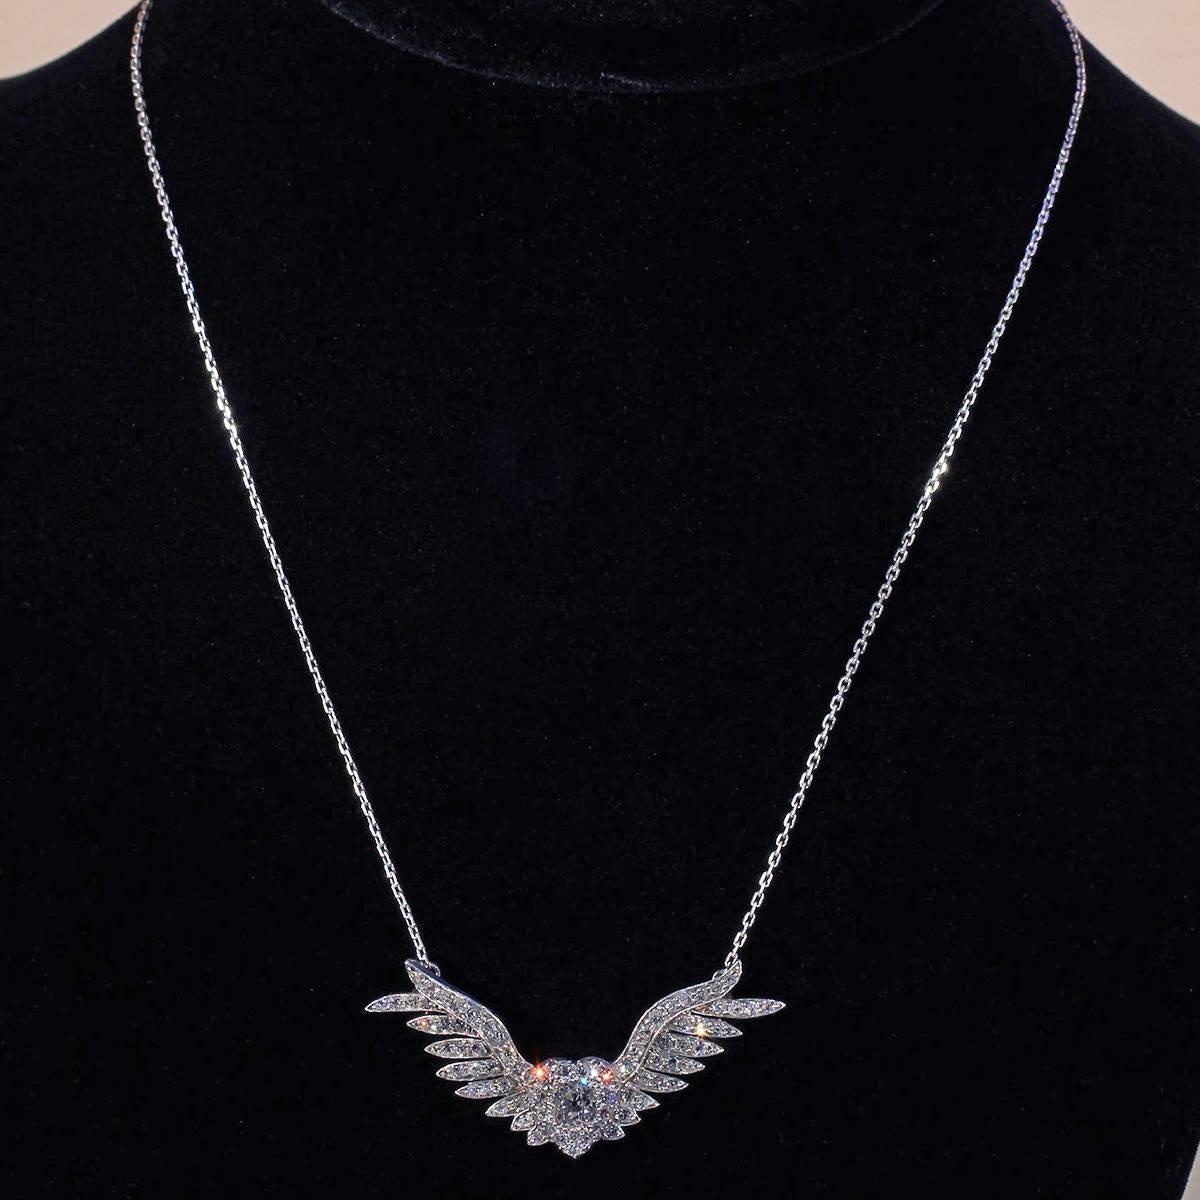 This fabulous Victorian Heart and Wings necklace was made in England in the Aesthetic period  (1885-1901) at the end of the 19th century, during which jewelry took on a sense of whimsy and lightheartedness. It is fully hand crafted, down to the